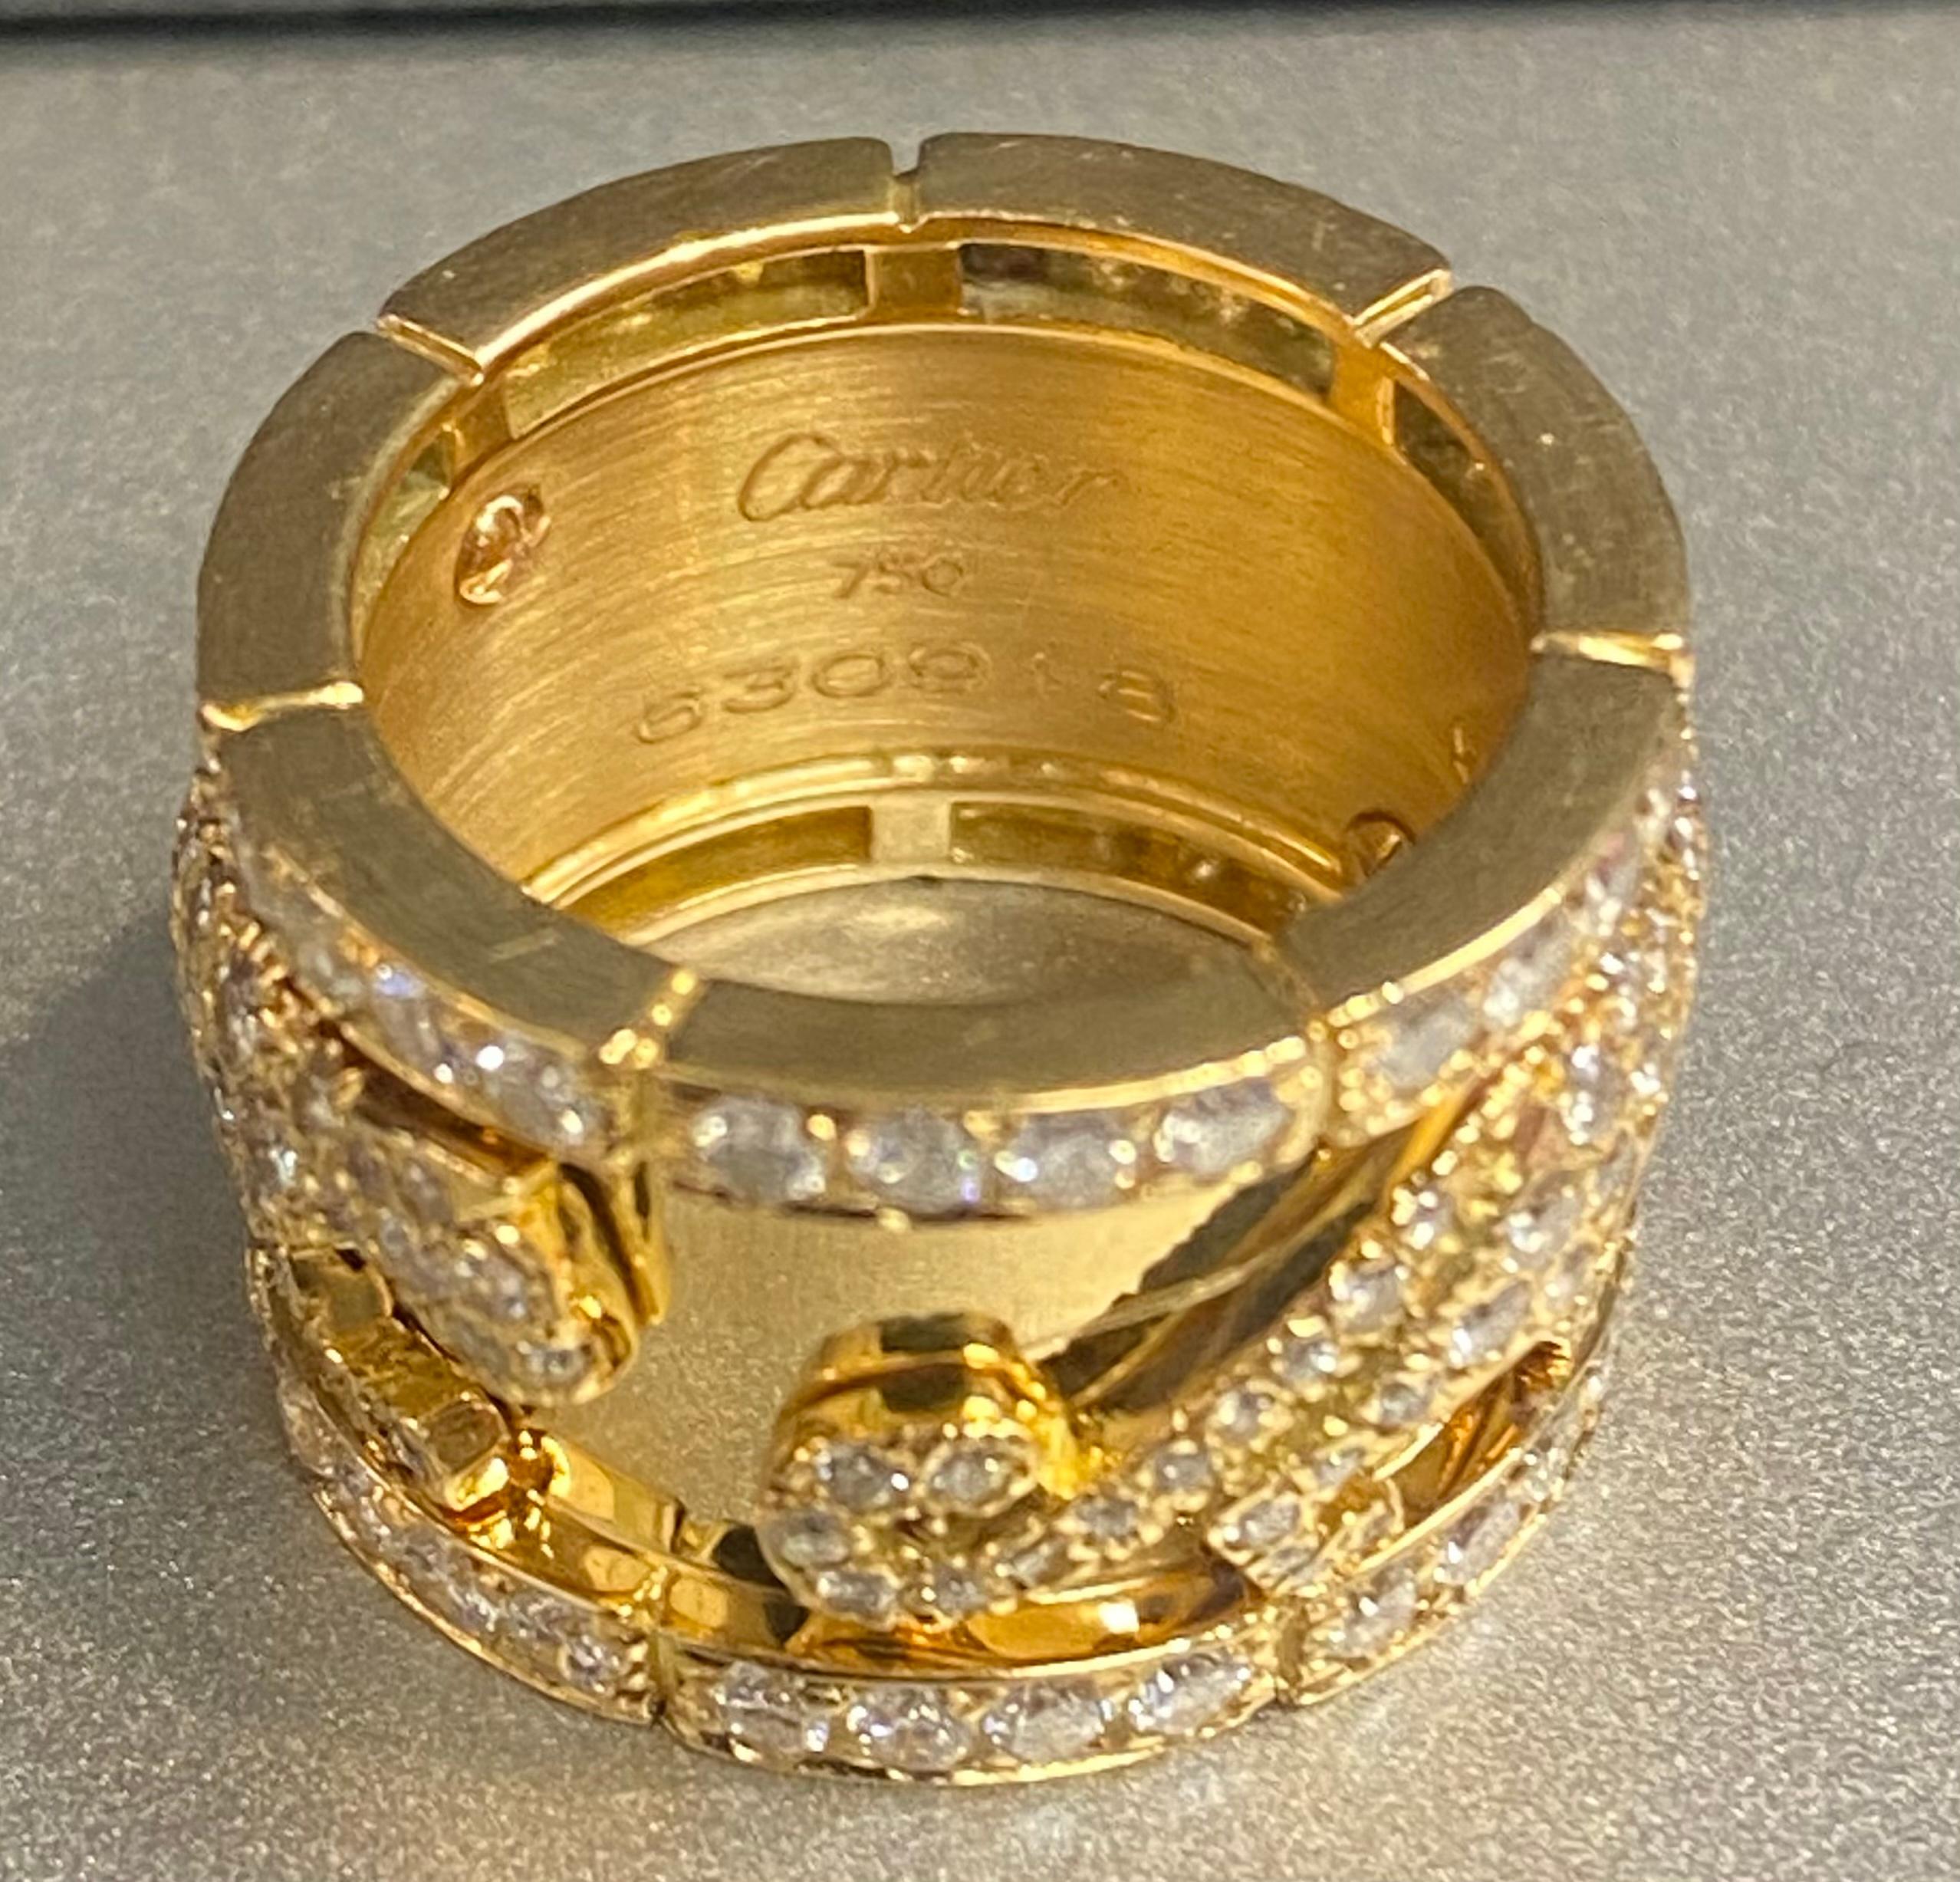 Cartier Mahango Walking Panthère' Diamond Ring In Excellent Condition For Sale In New York, NY